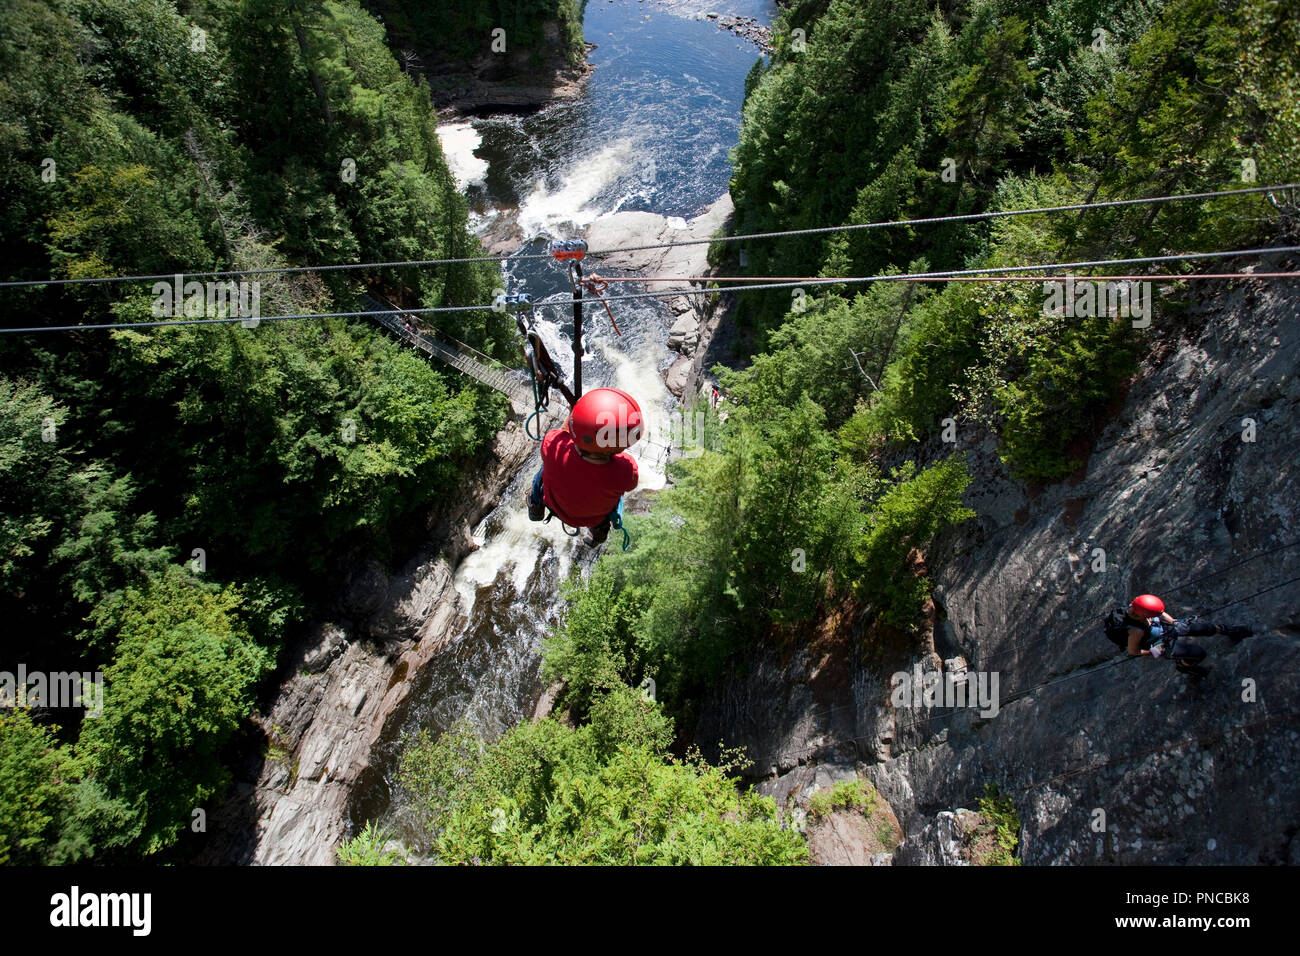 North America, Canada, Quebec, Beaupre, Canyon Ste-Anne,  boy on zip line watching woman rock climber Stock Photo